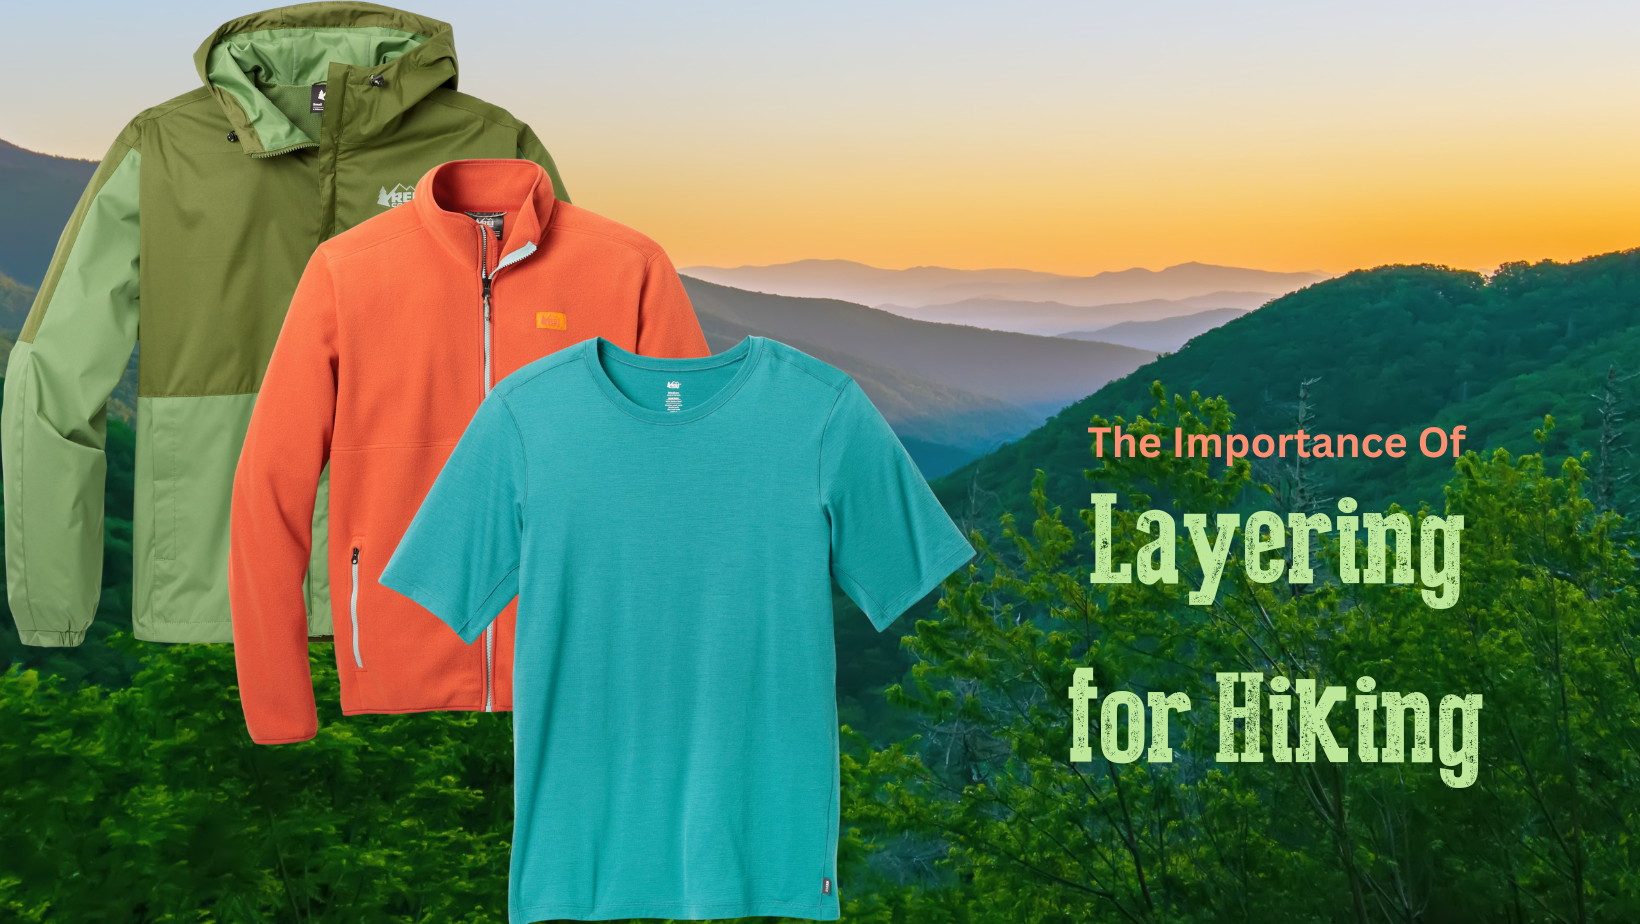 The Importance of Layering for Hiking